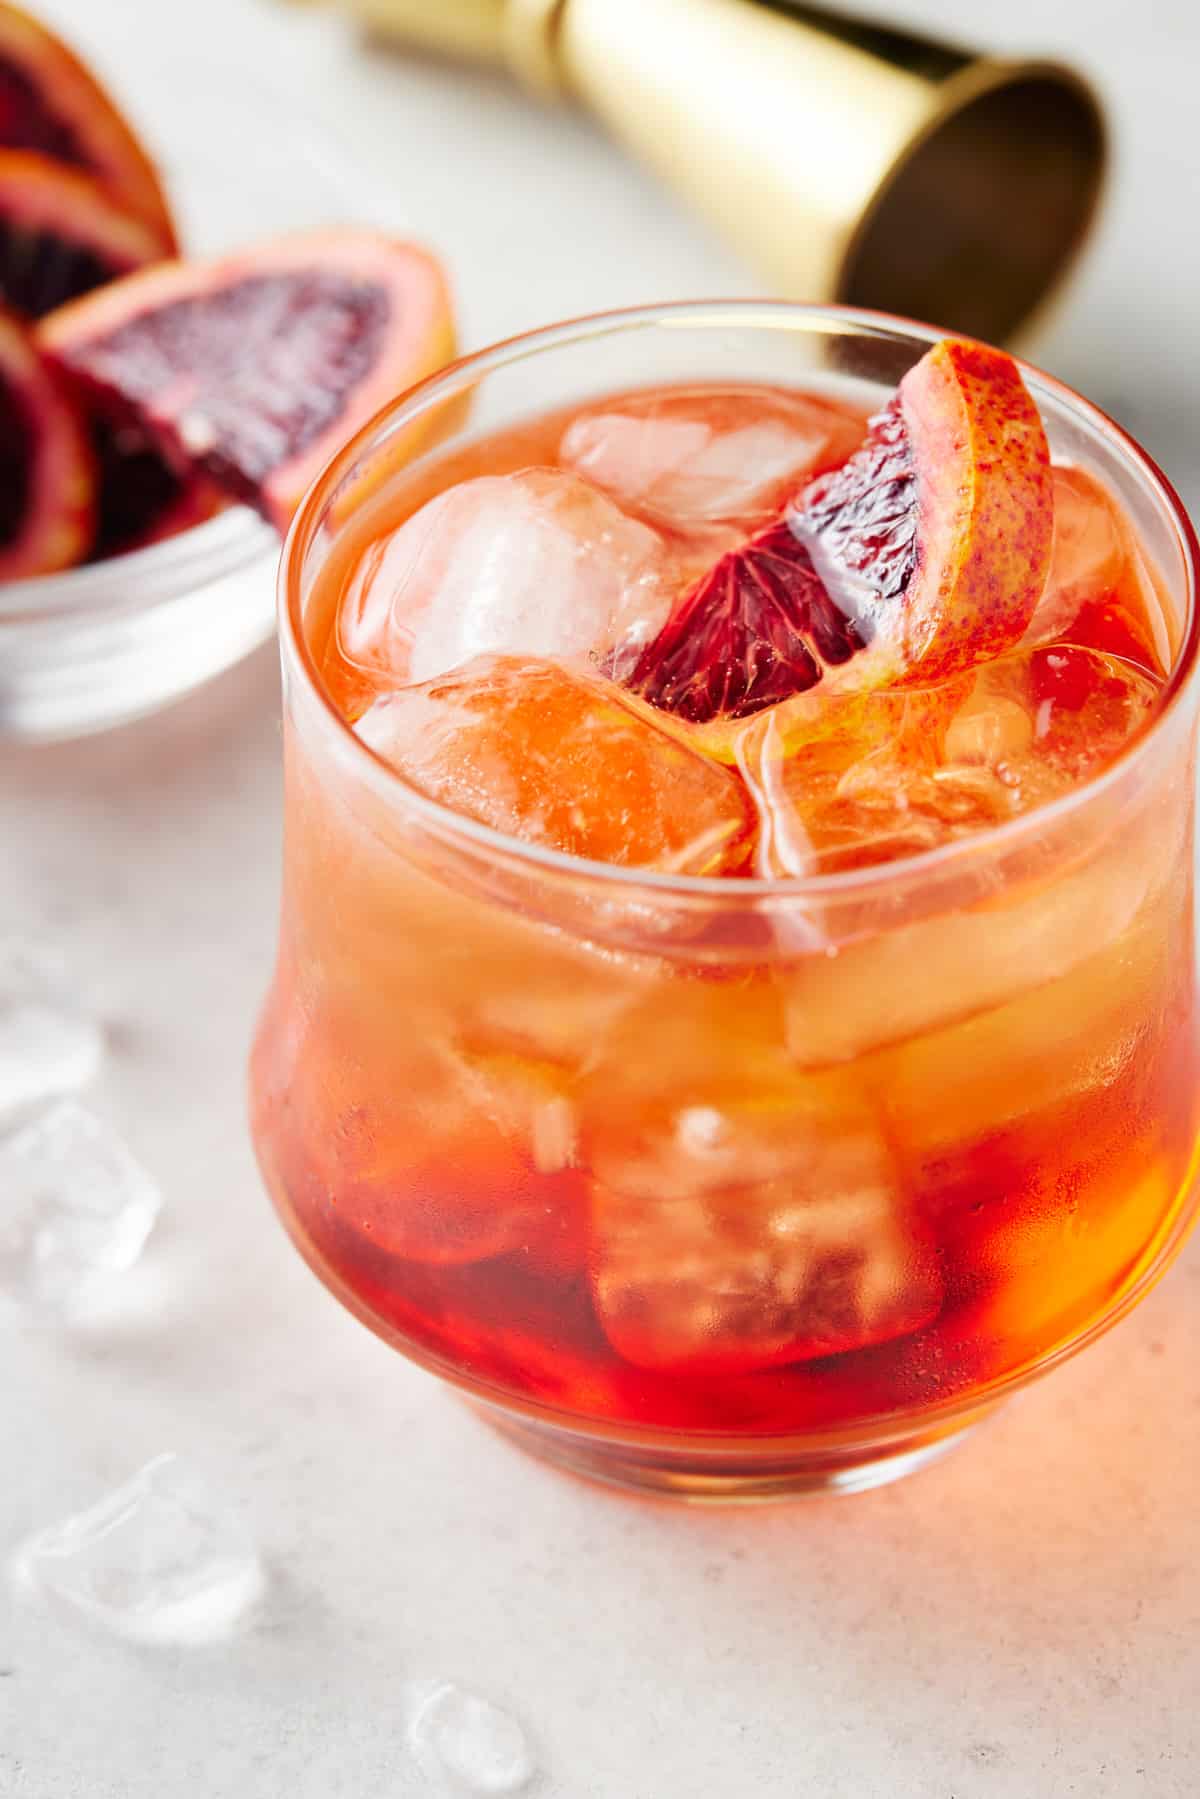 Aperol and soda in a low ball glass with a blood orange slice.